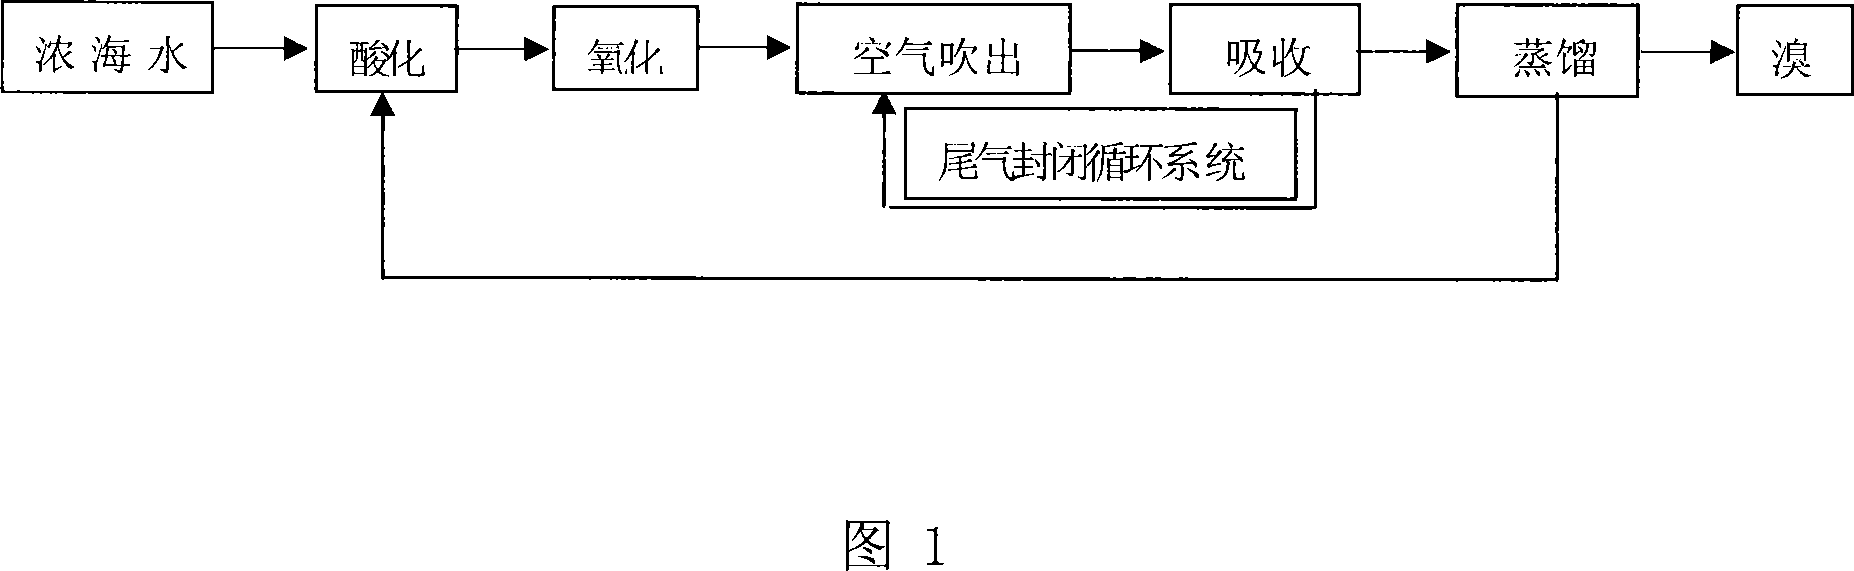 Technology process for producing bromide using concentrated seawater